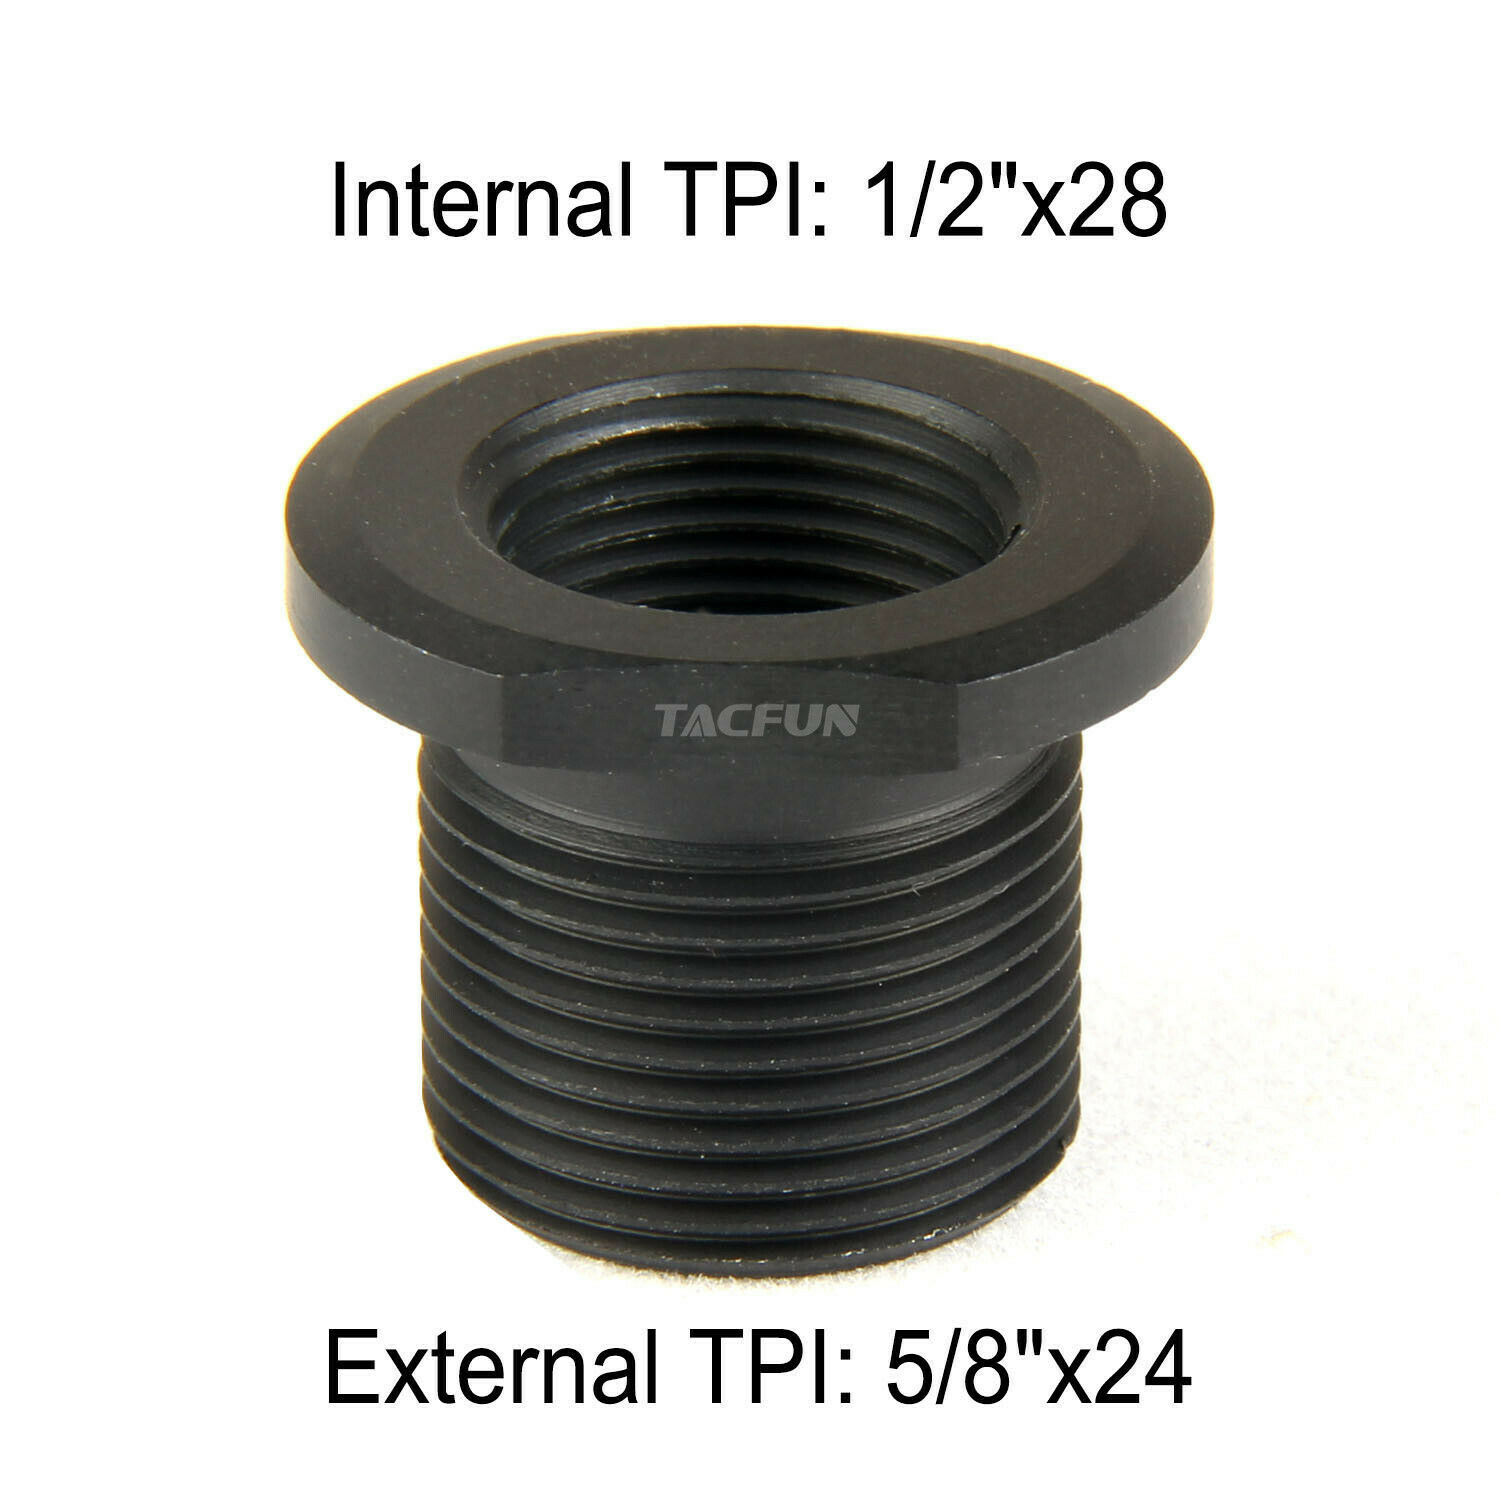 Steel Adapter Muzzle Thread Convert 1/2x28 Tpi To 5/8x24 Tpi + Crush Washer